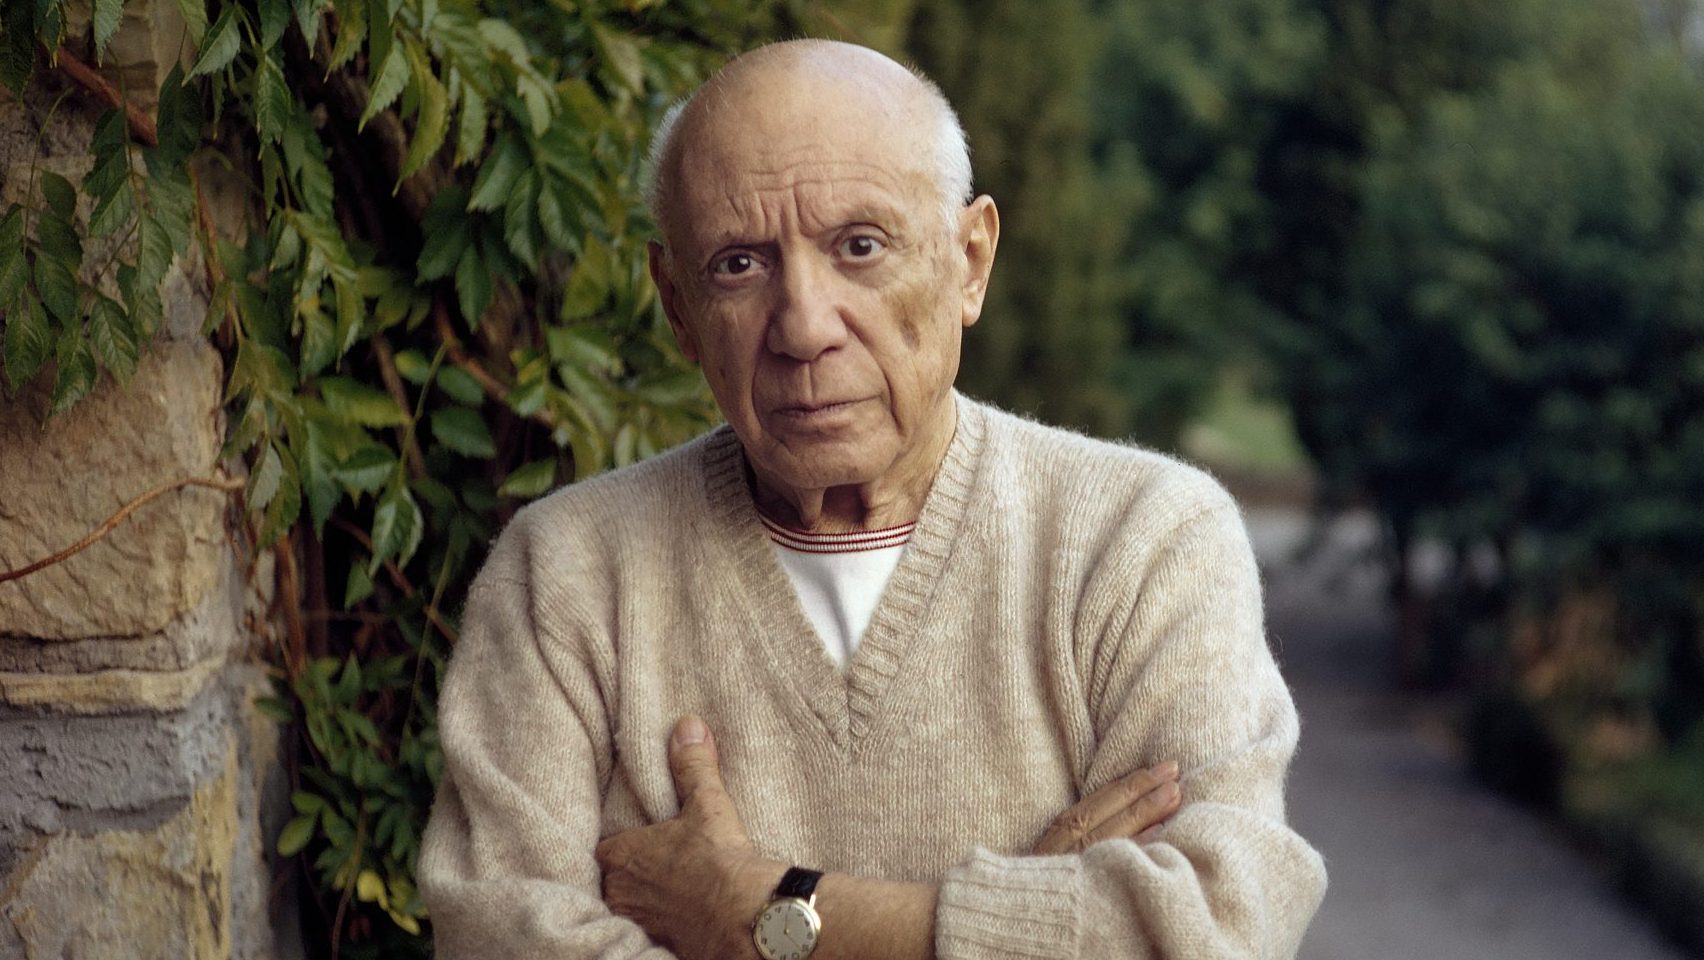 Picasso in Mougins, France, 1966. Photo: Tony Vaccaro/Getty